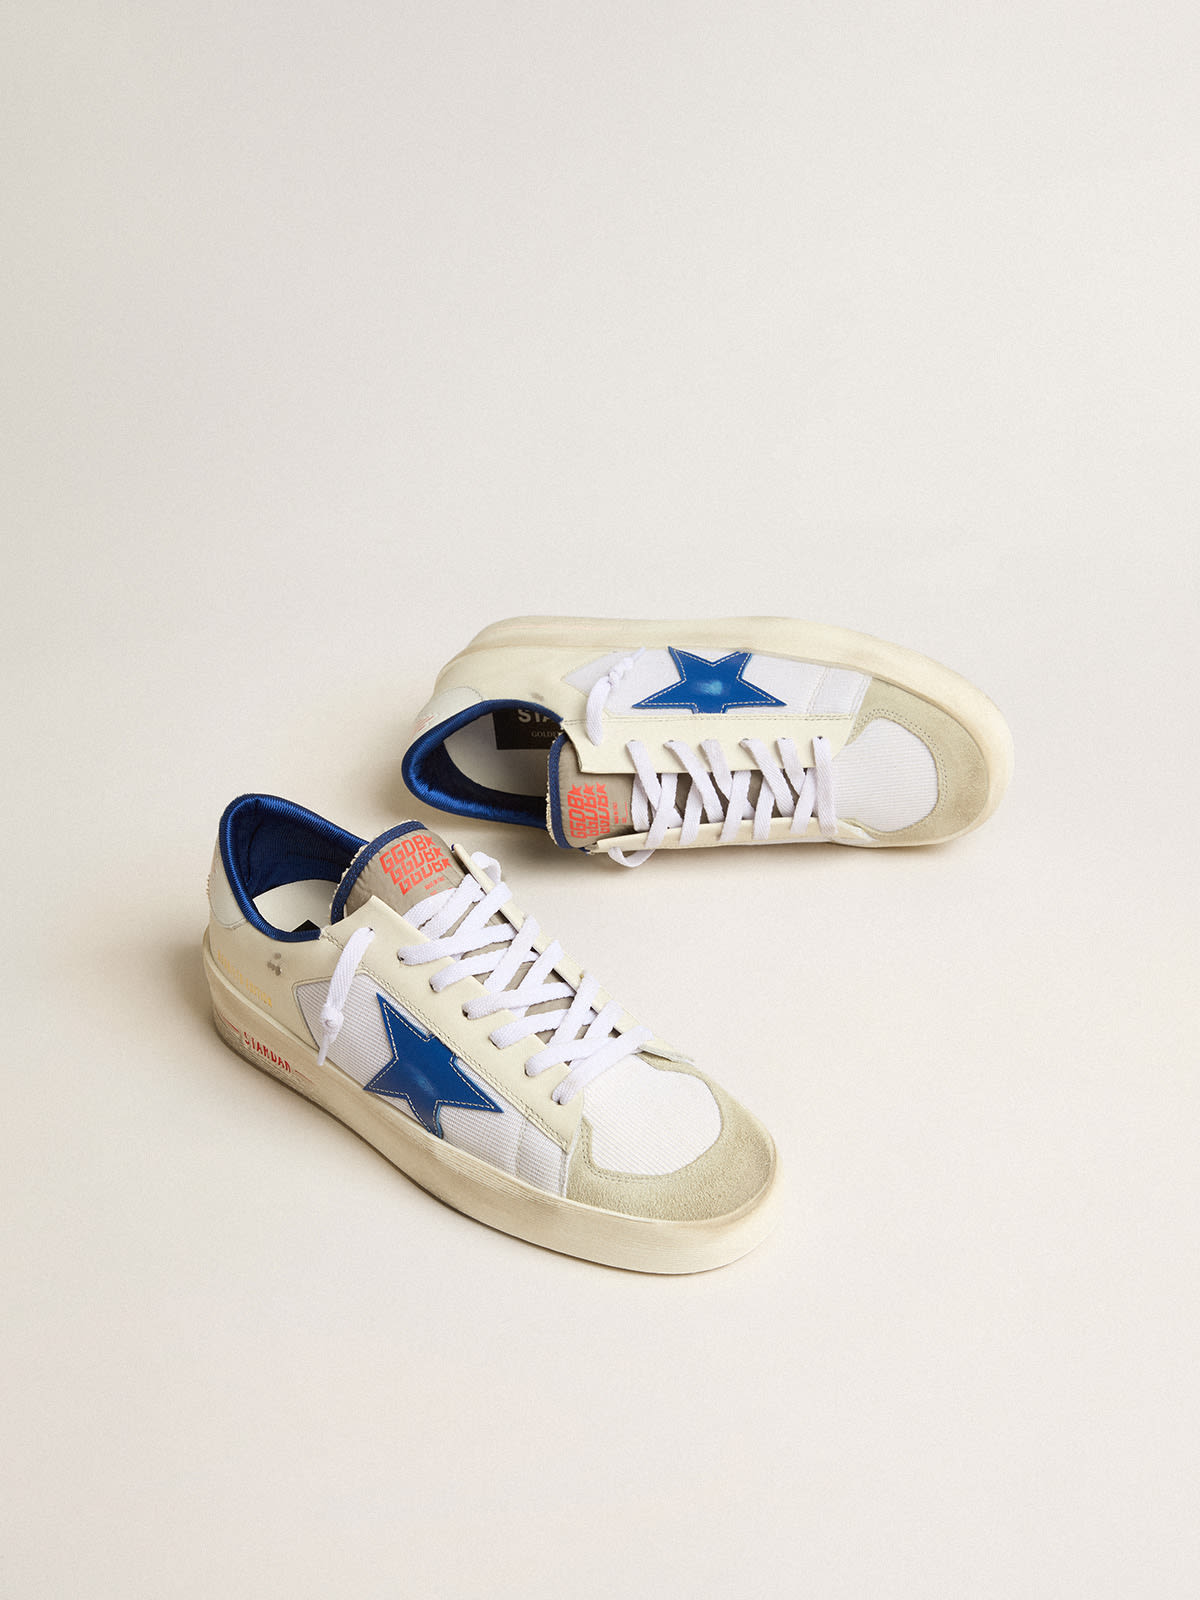 Stardan LTD in white mesh and leather with blue star and white heel tab